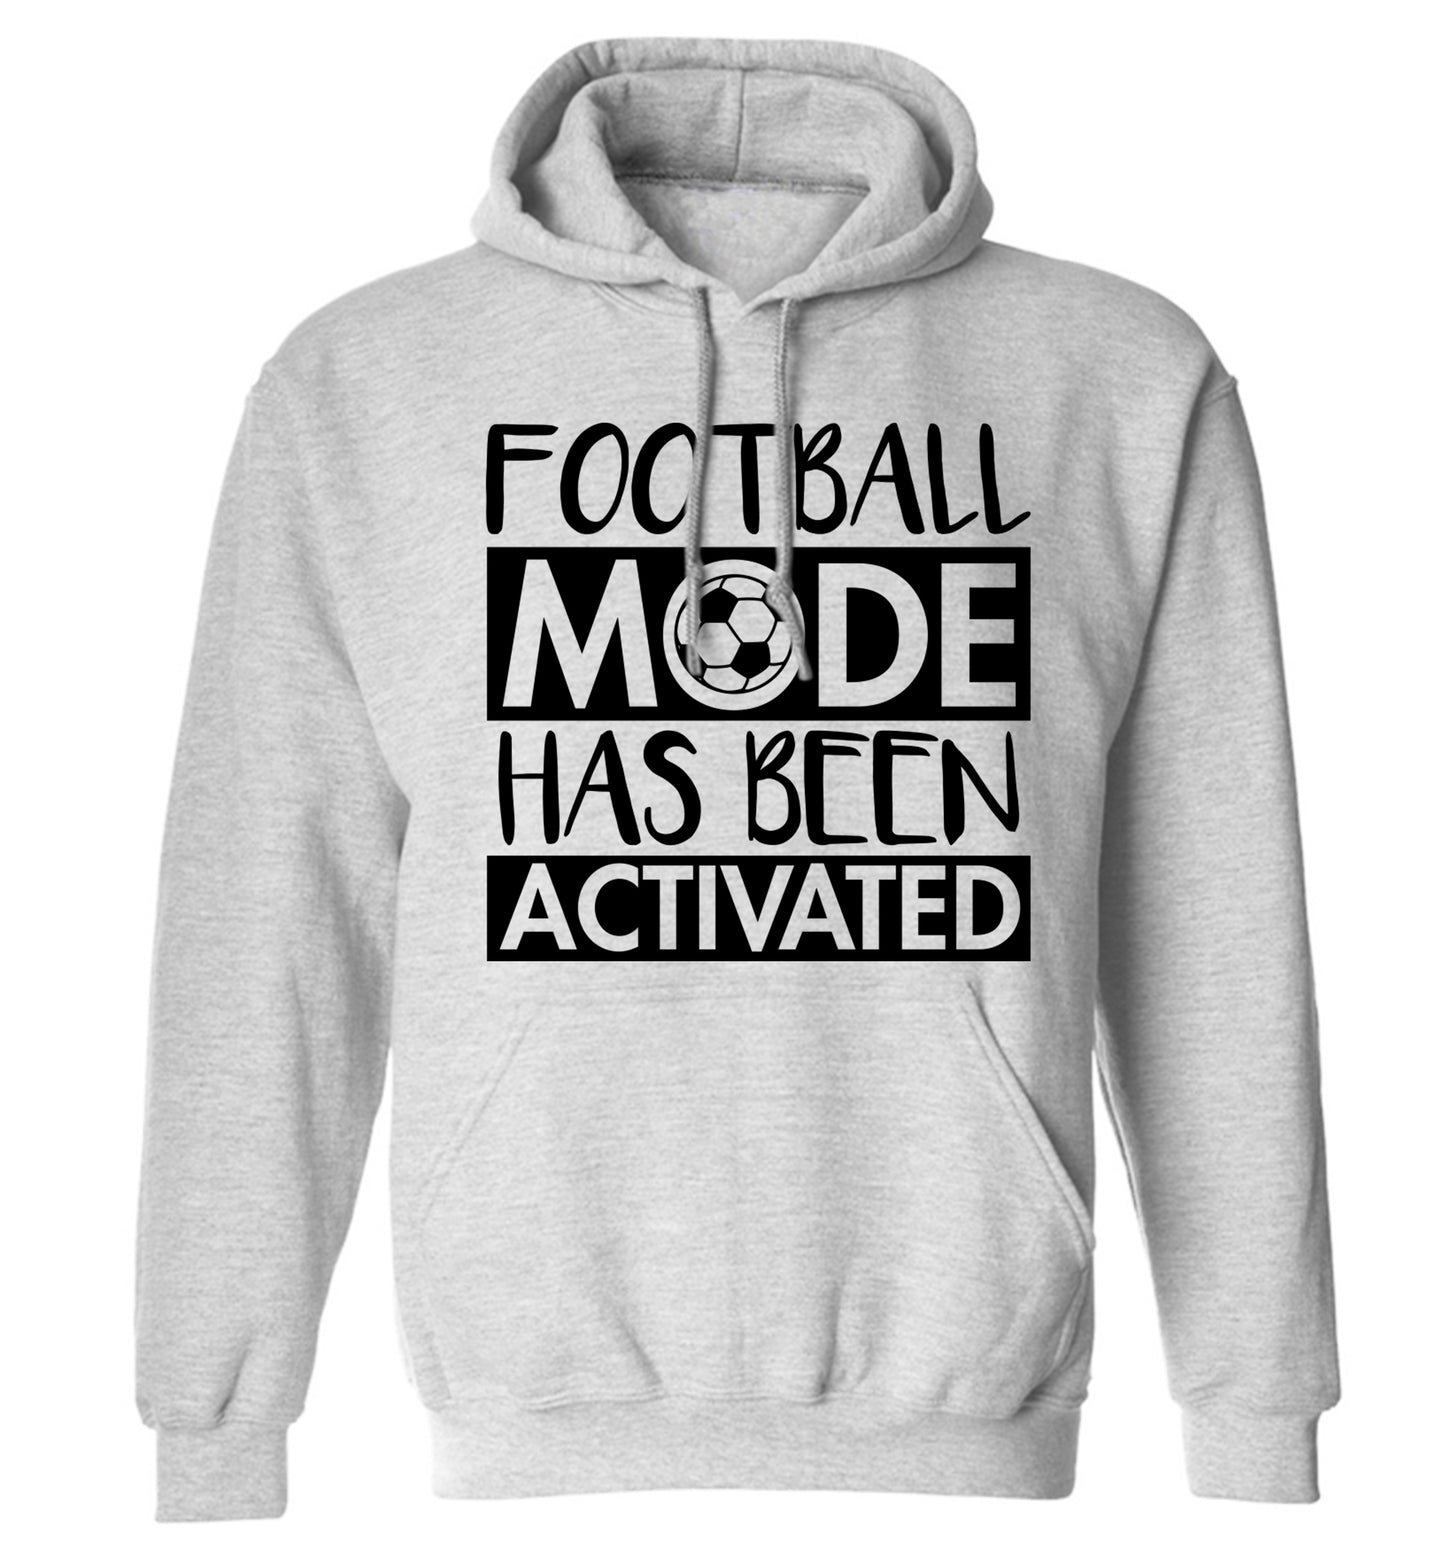 Football mode has been activated adults unisexgrey hoodie 2XL